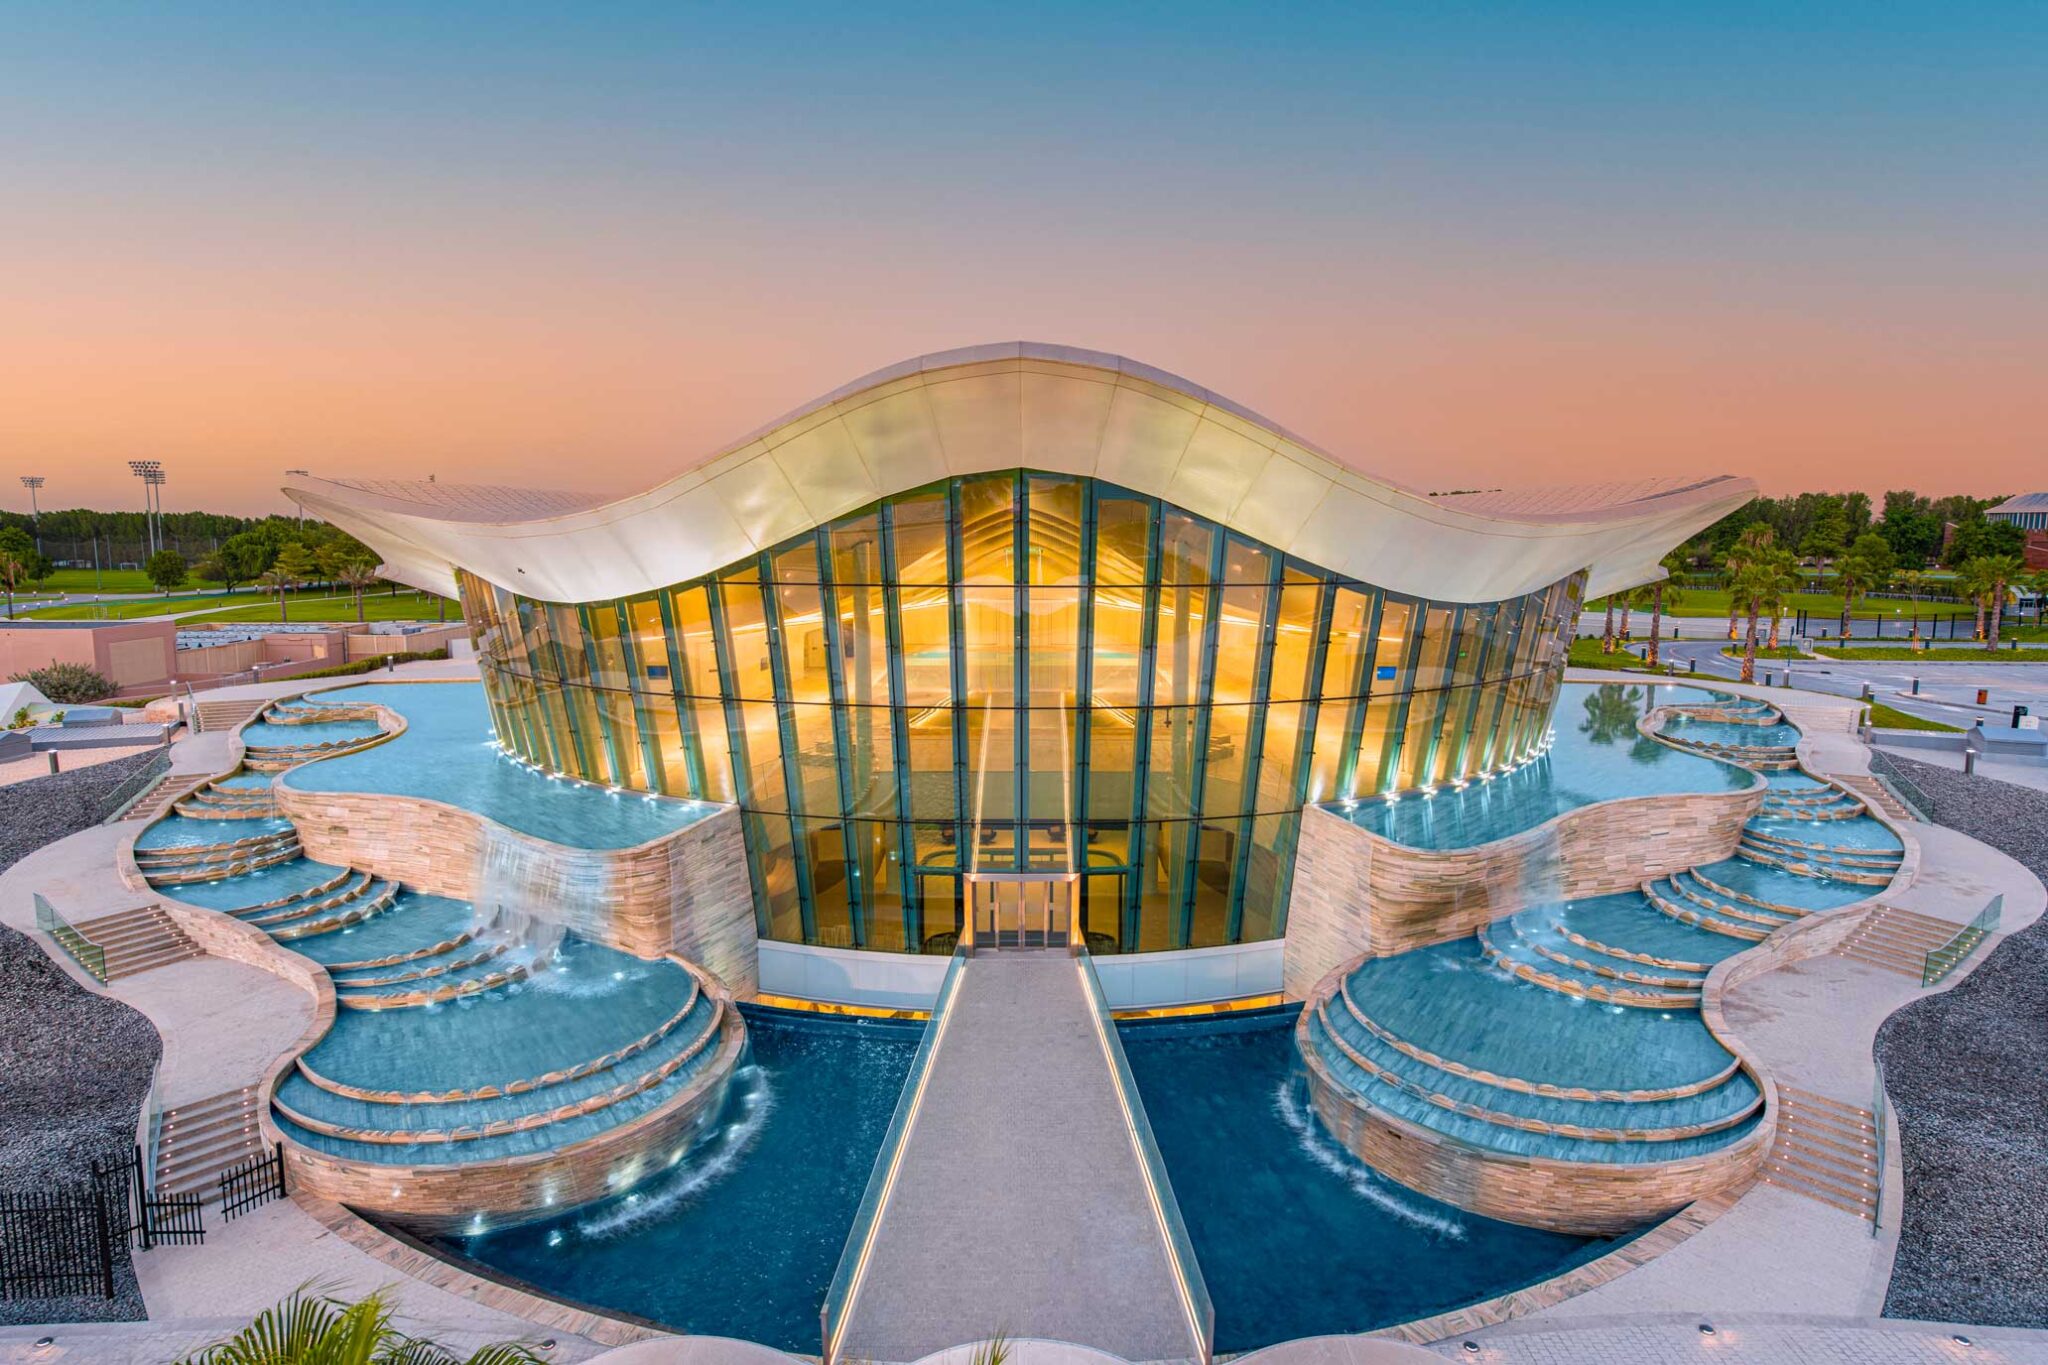 The oyster-shaped exterior of Deep Dive Dubai, which is home to one of the best deep pools in the world